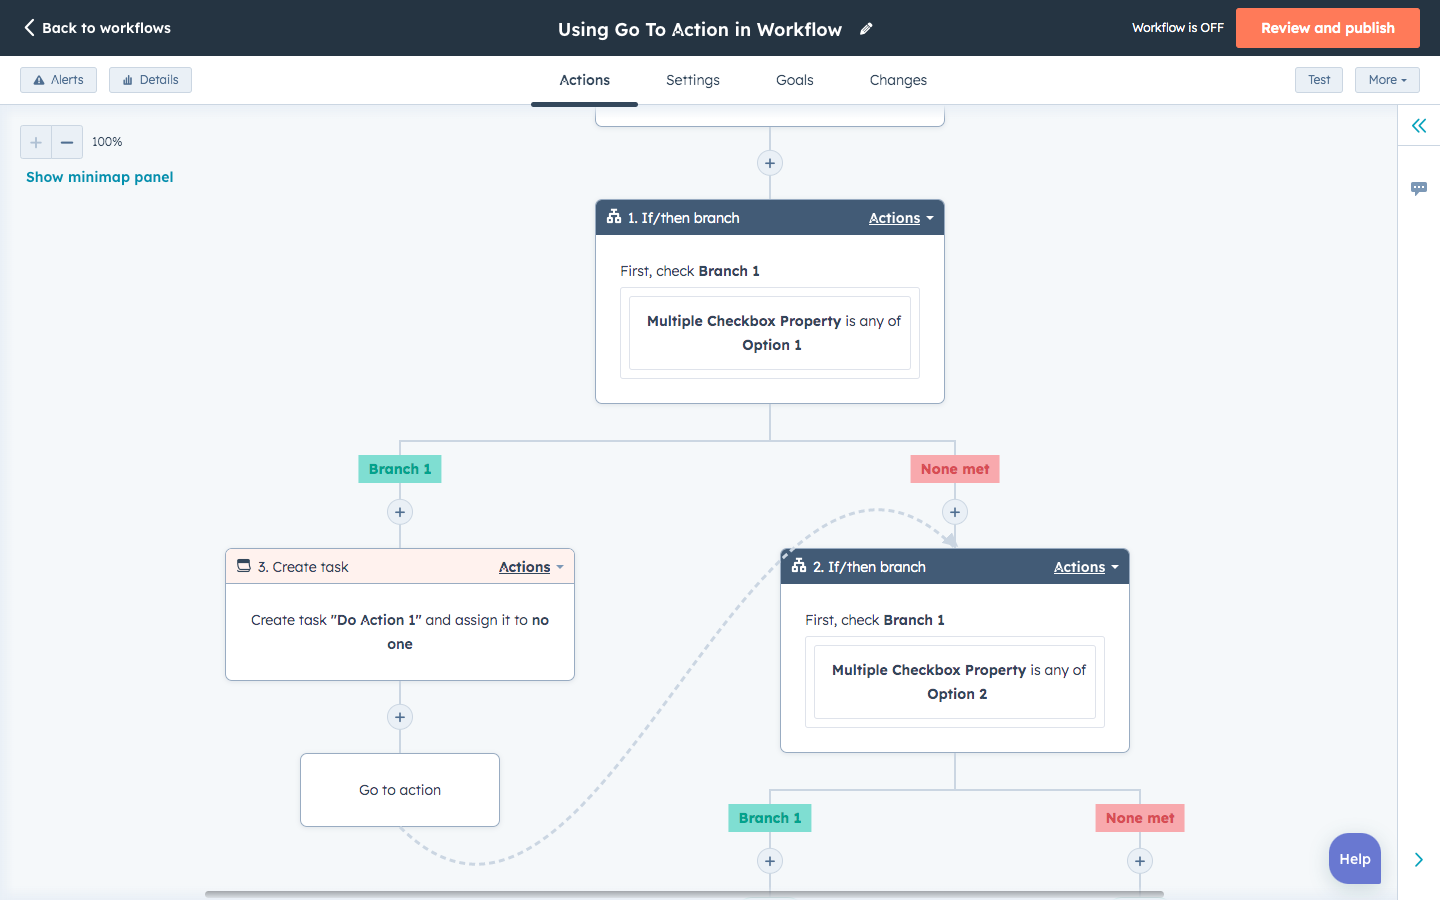 Screenshot of the HubSpot Workflow using 'Go to other action' 